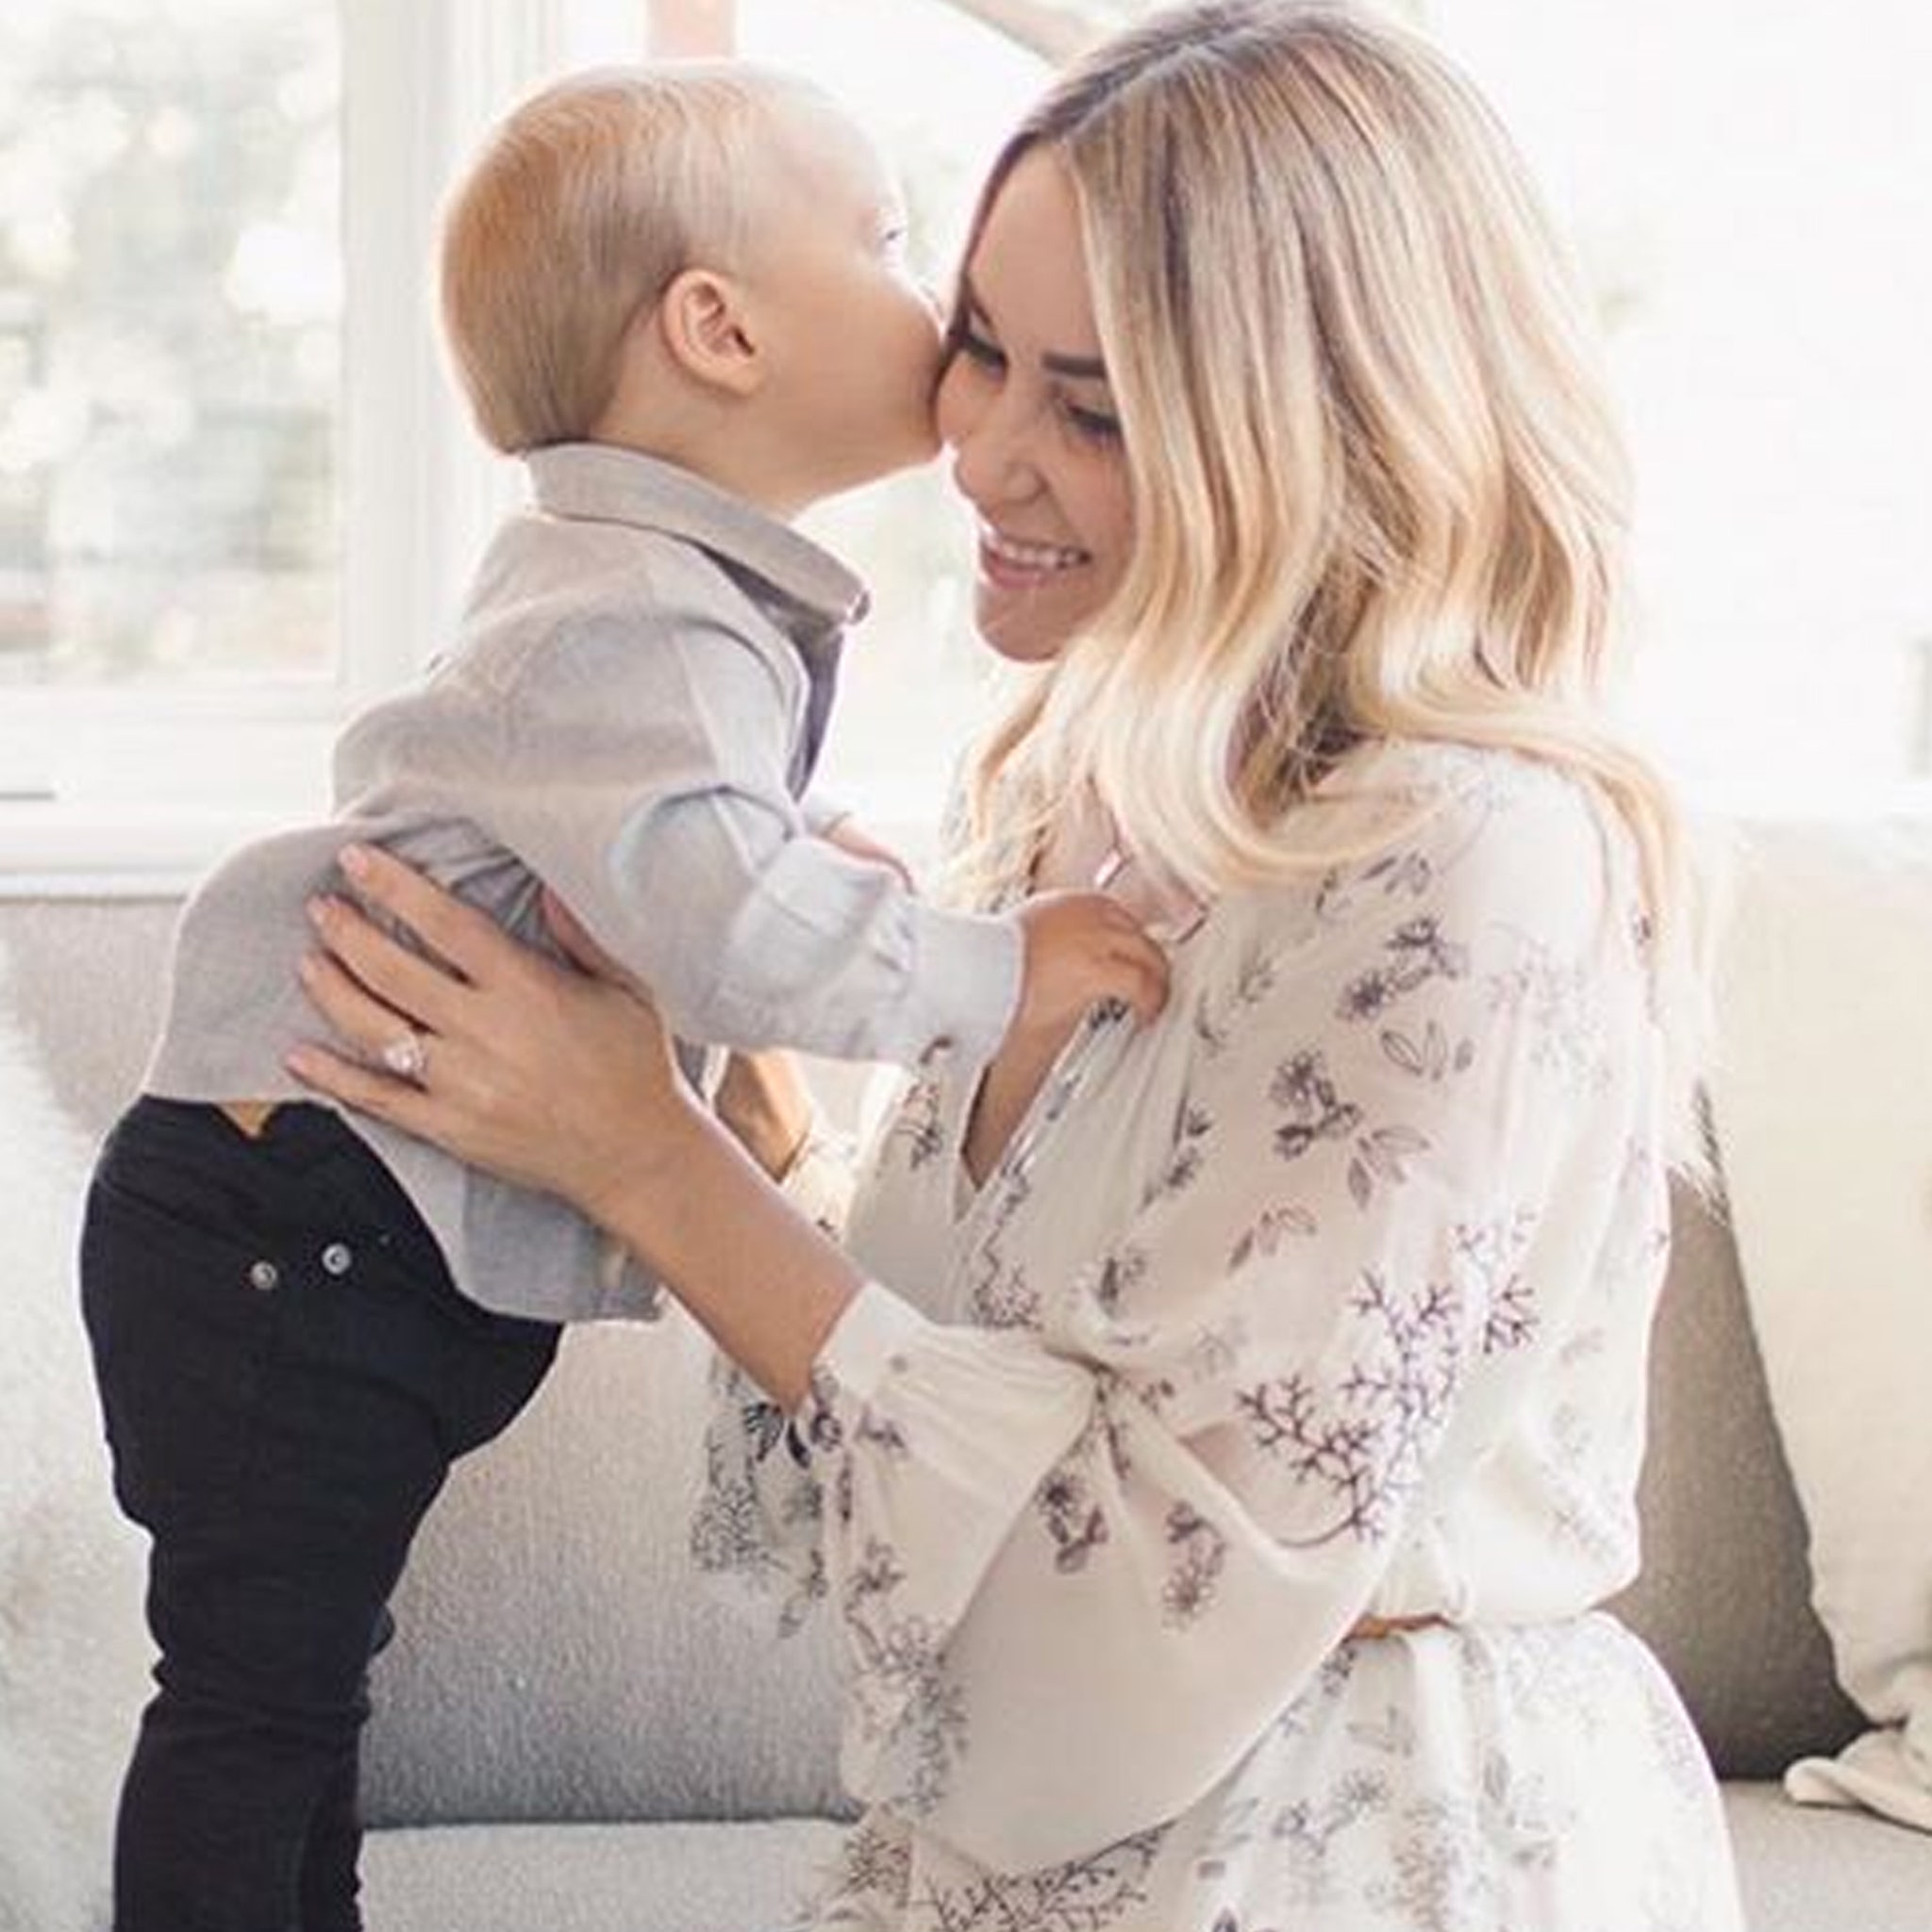 Lauren Conrad Has Second Baby With Husband William Tell